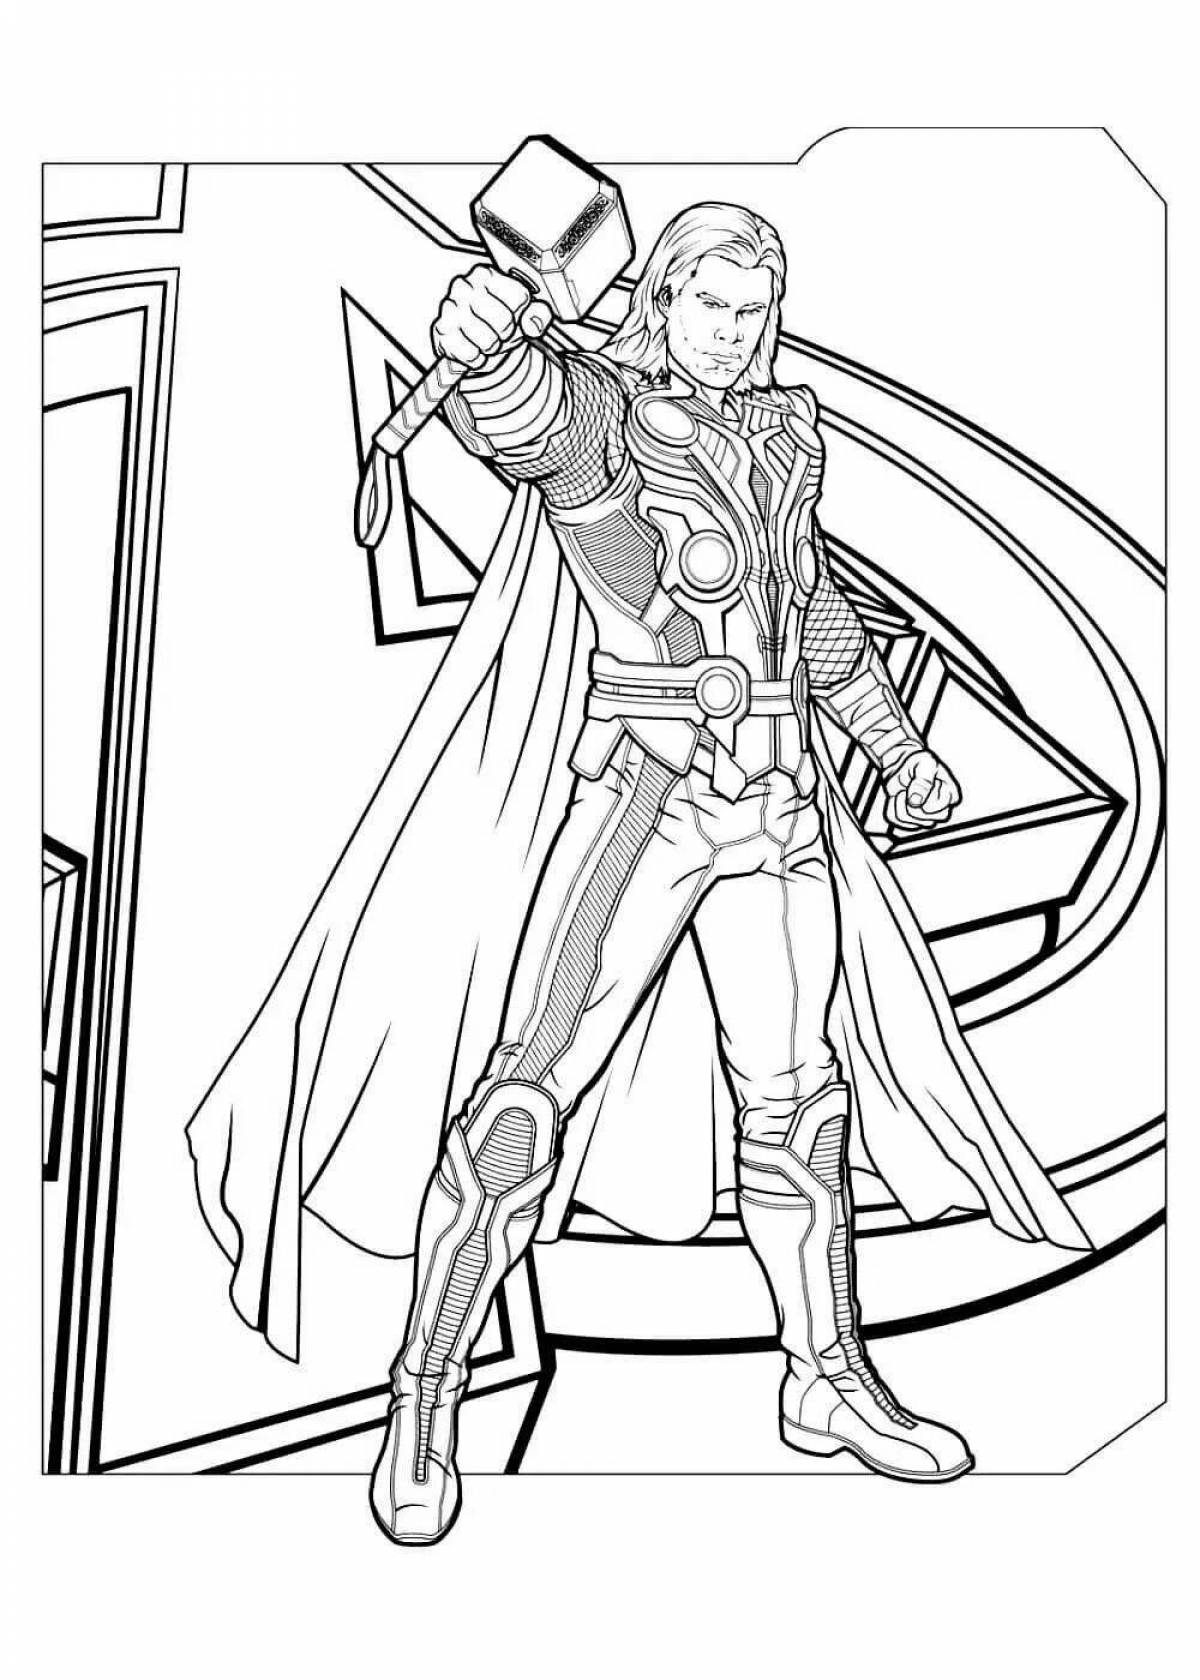 Avengers attraction coloring book